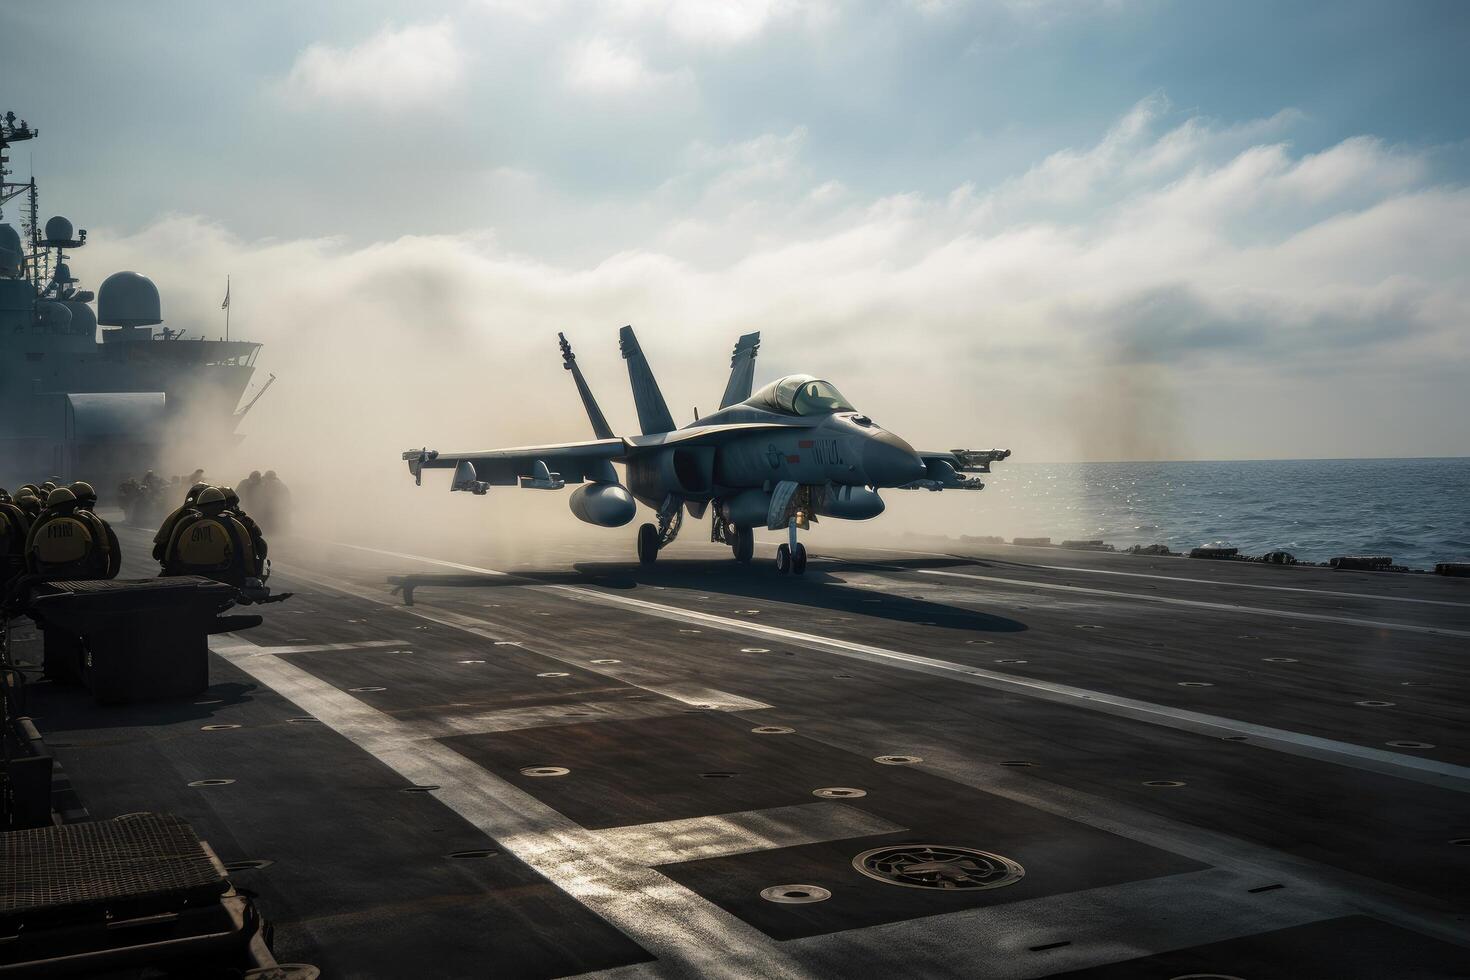 Fighter jet fighter on the deck of a military aircraft carrier. Fighter jets are taking off from an aircraft carrier, photo